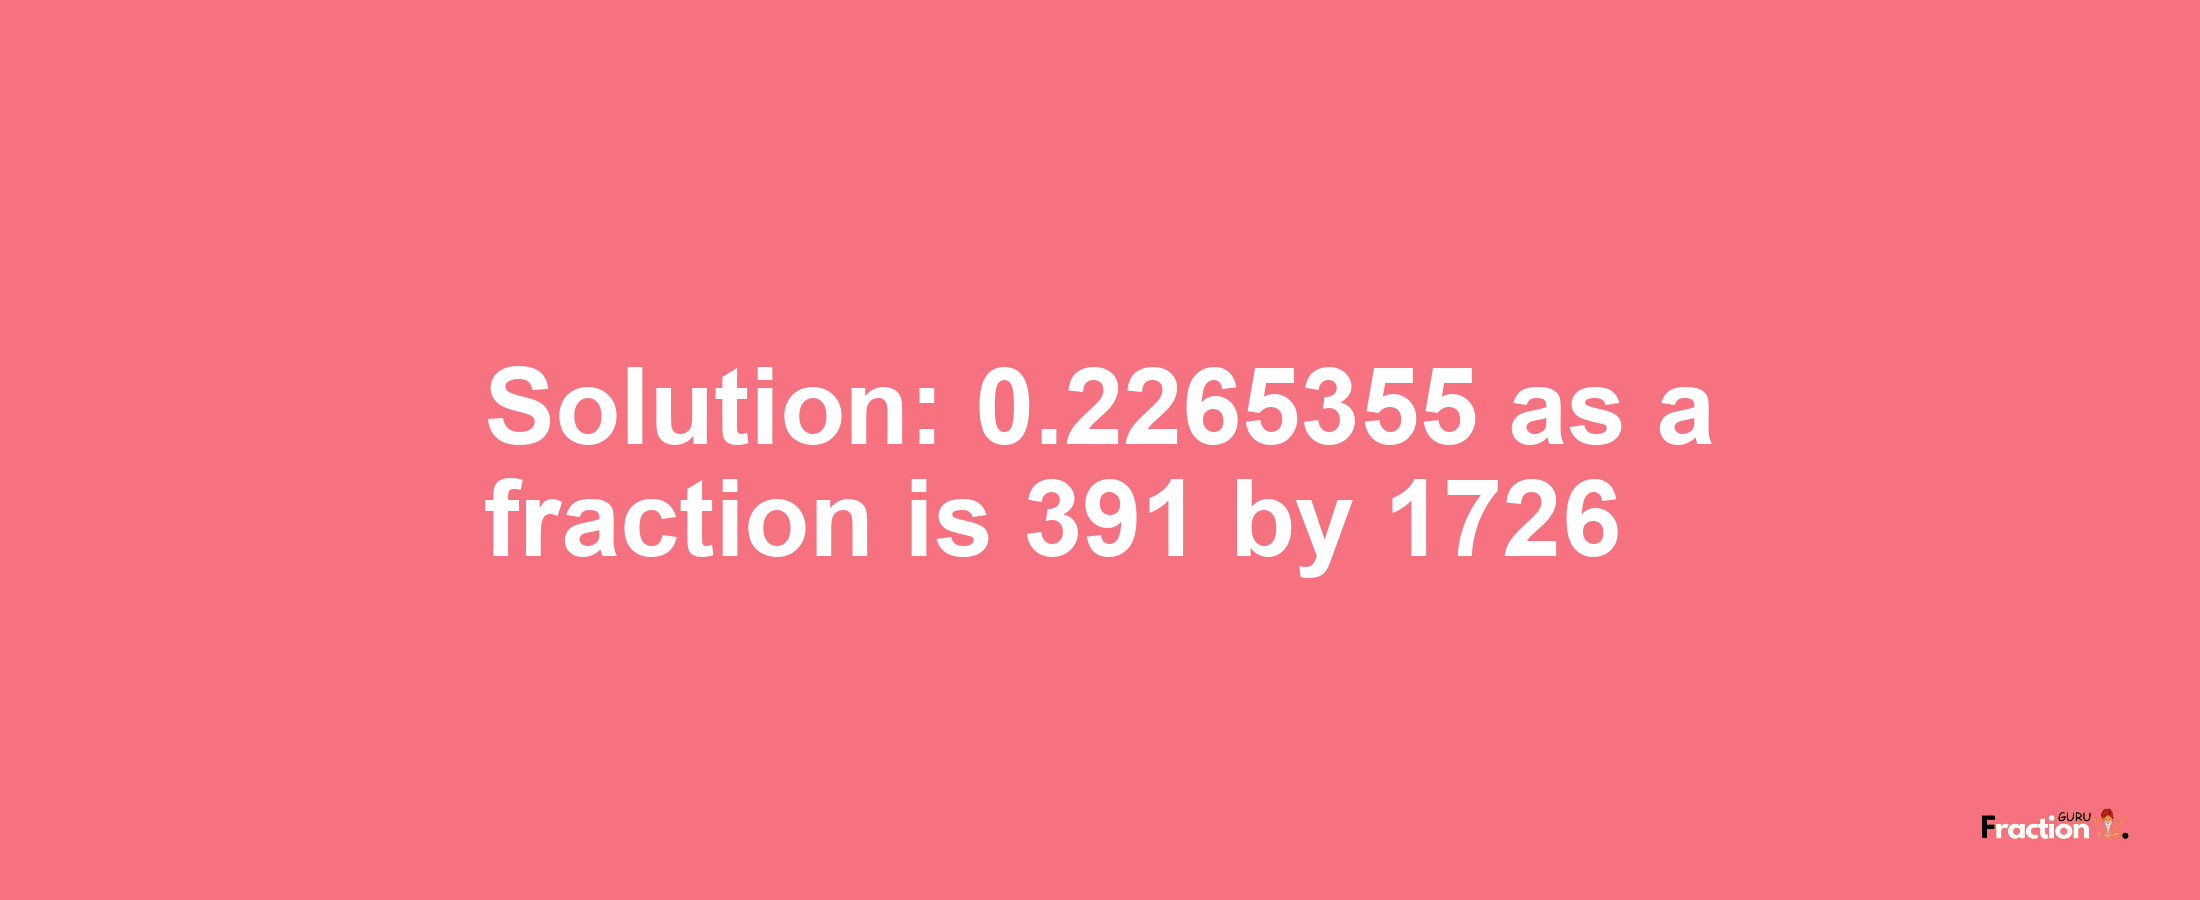 Solution:0.2265355 as a fraction is 391/1726